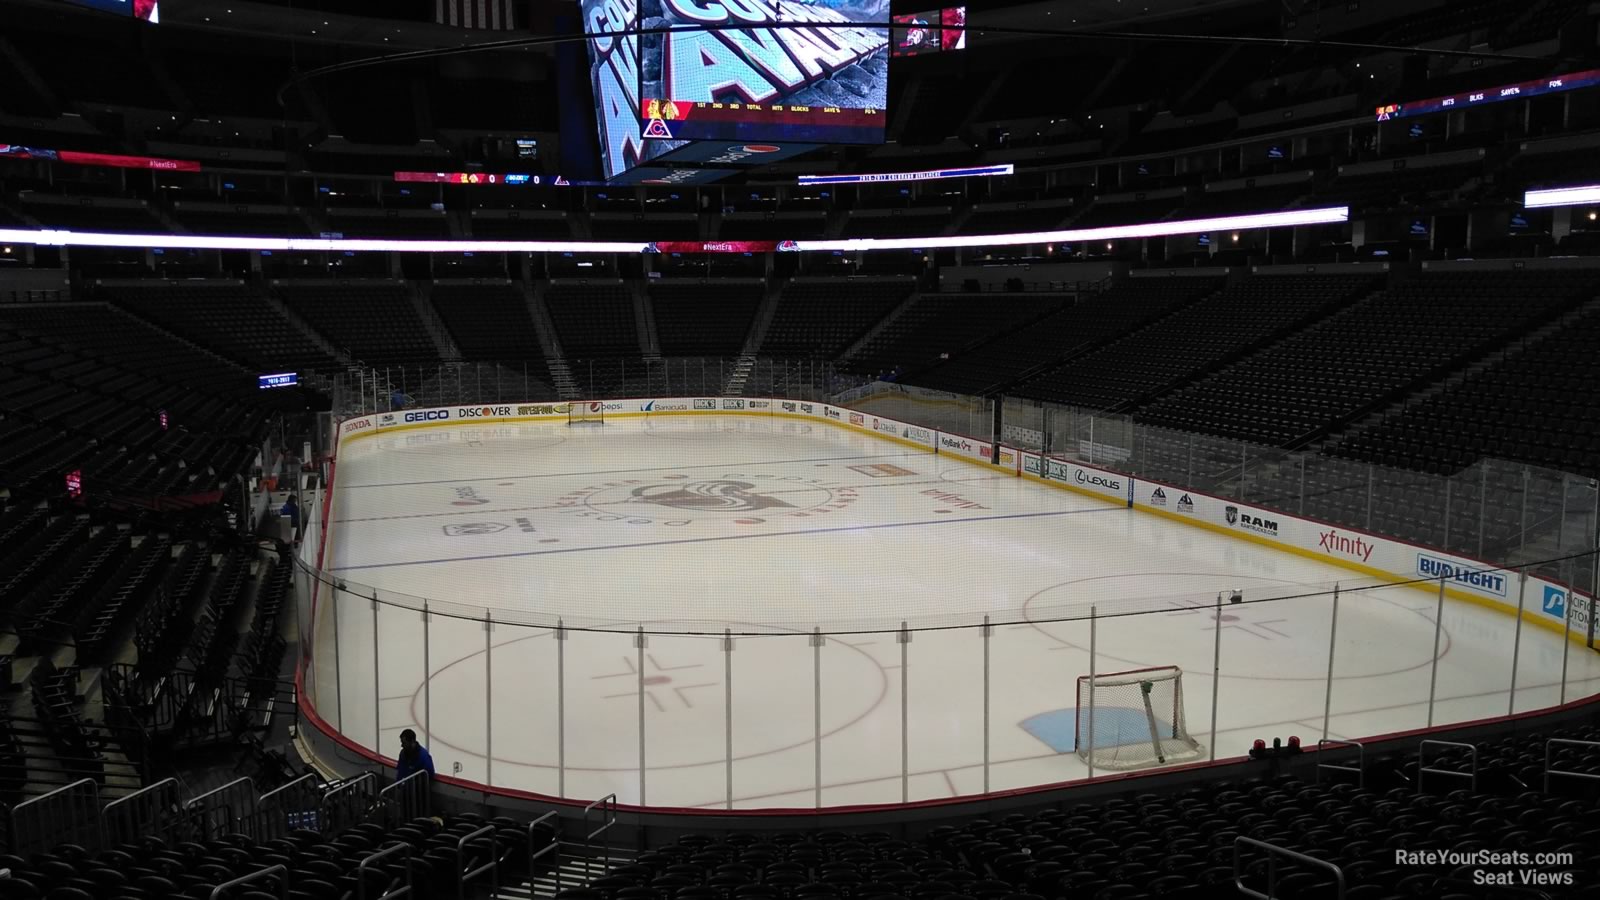 section 140, row 19 seat view  for hockey - ball arena